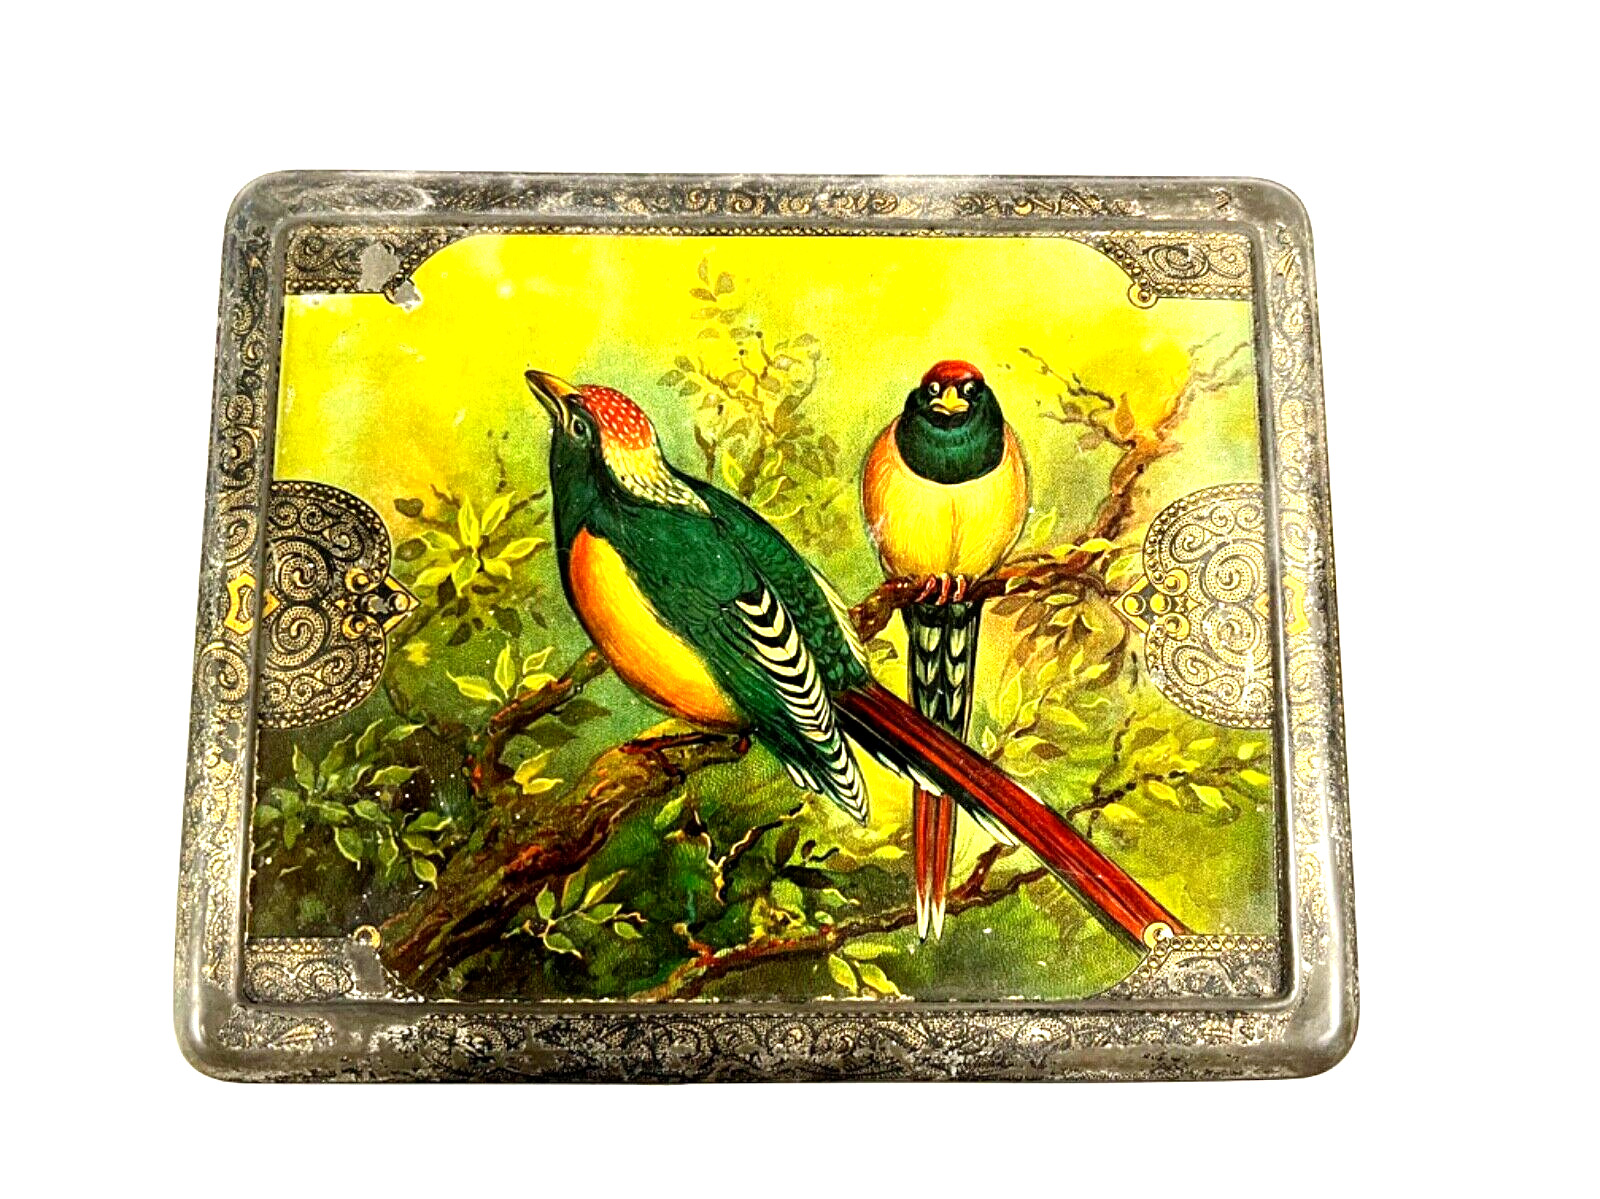 Antique Biscuit Tin; English Or German; Large; Beautiful Birds On Surface; 1890s